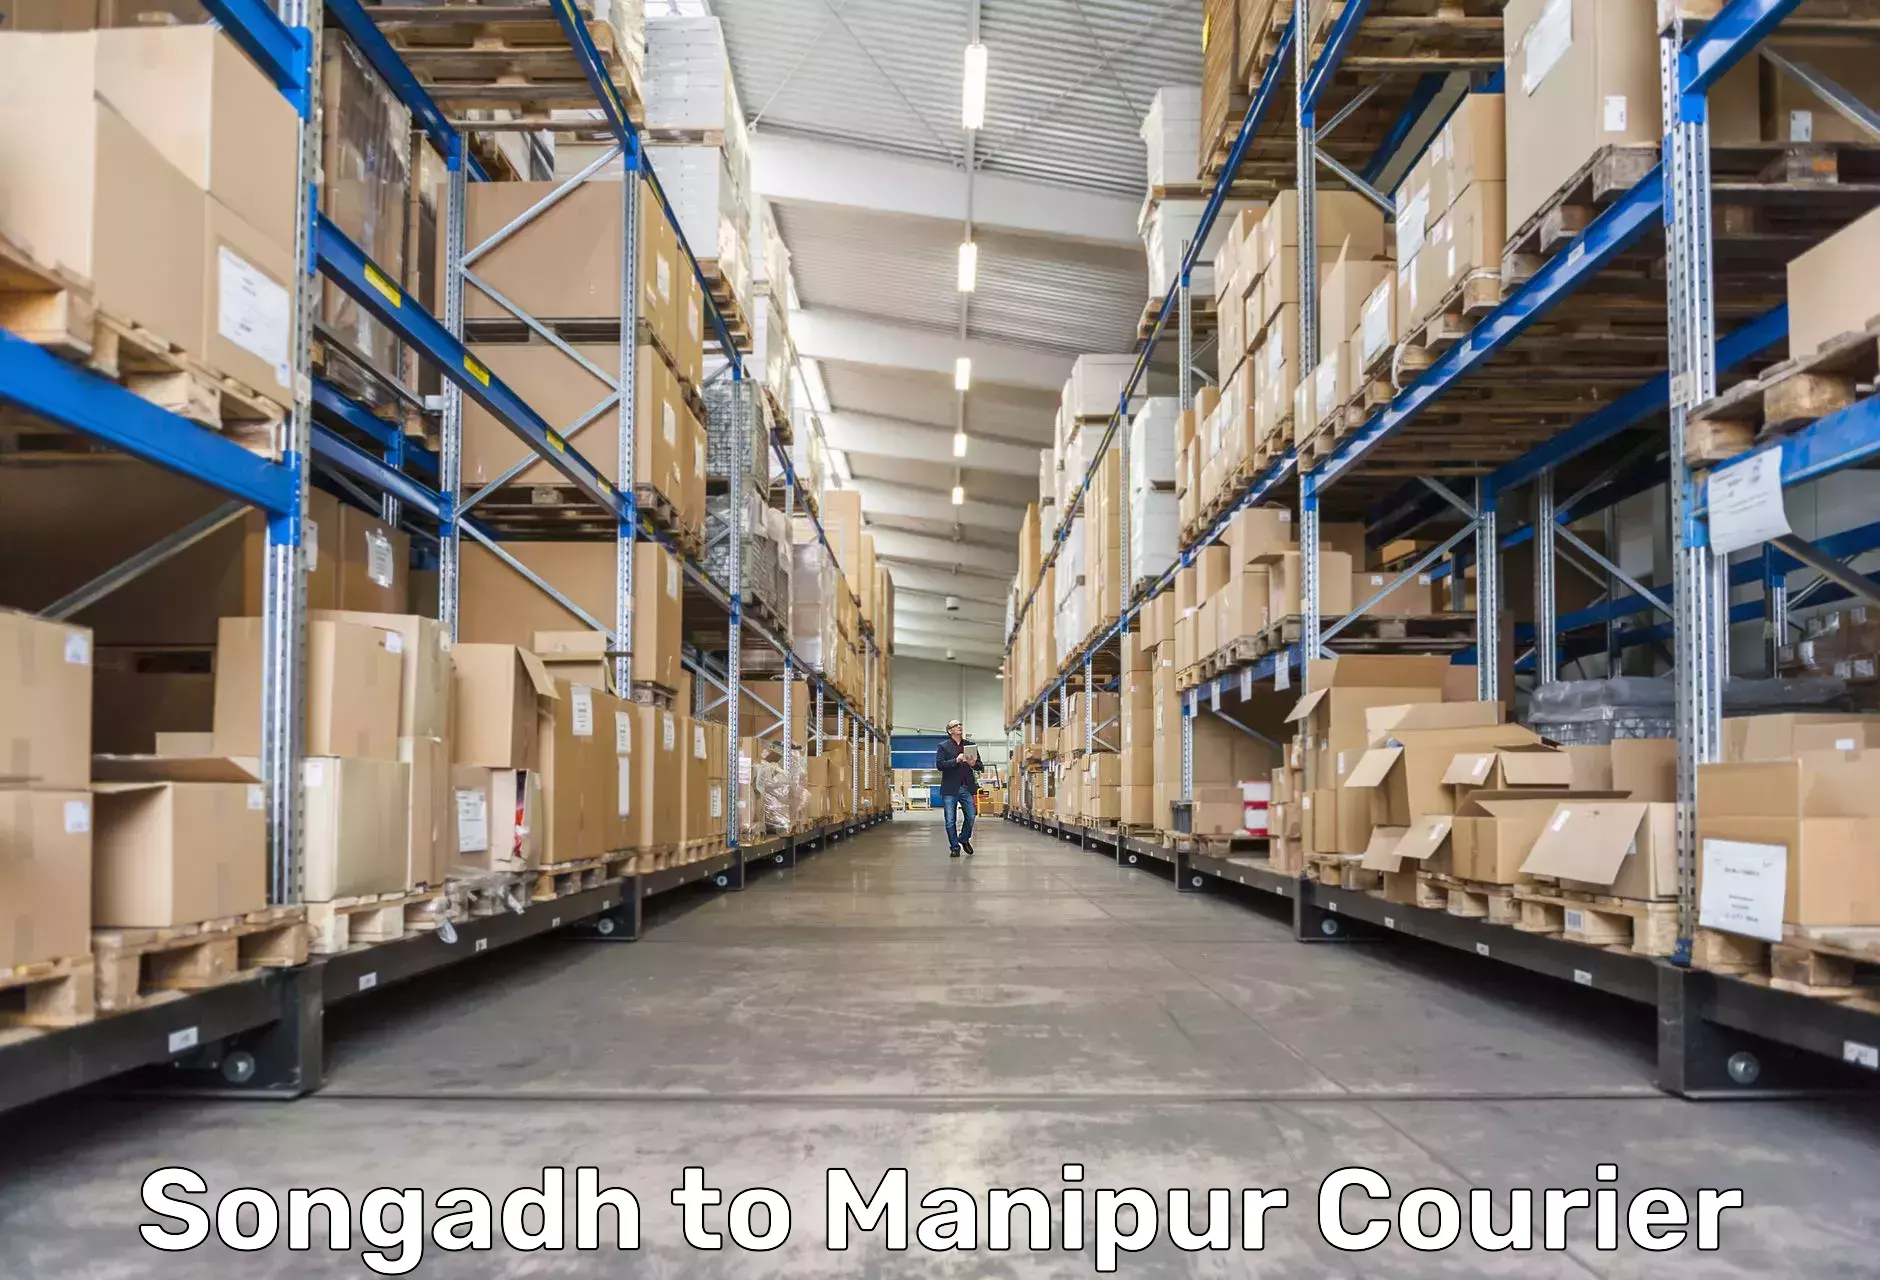 Global courier networks Songadh to Manipur